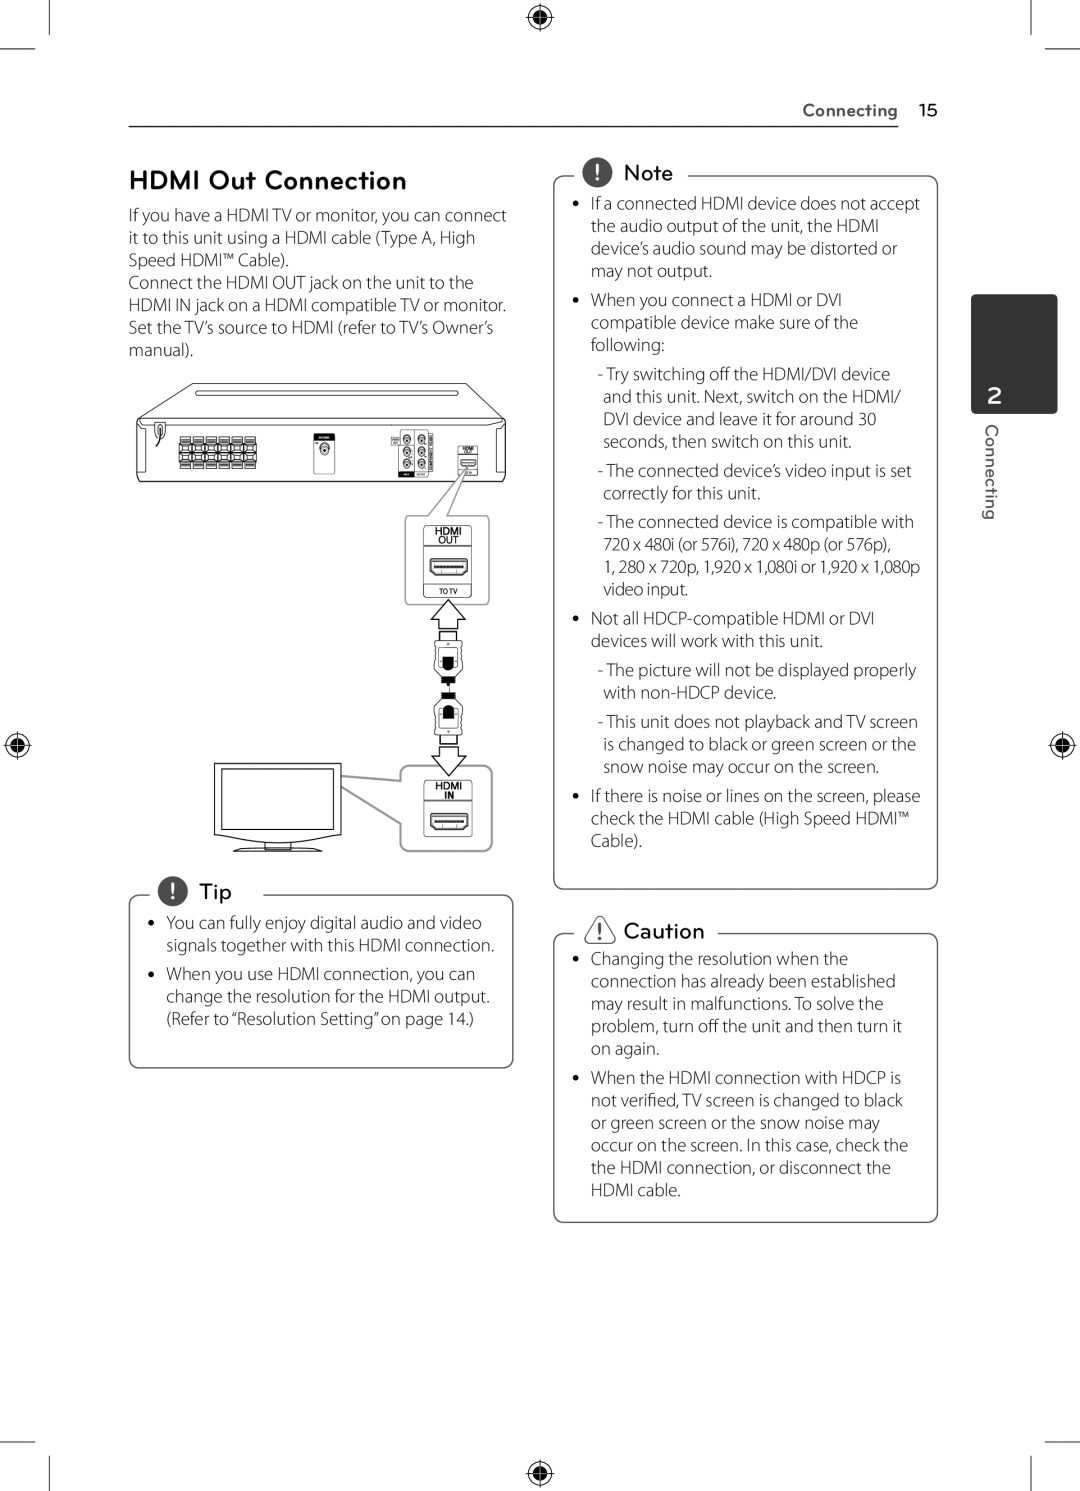 LG Electronics DH4220S owner manual HDMI Out Connection, Connecting 